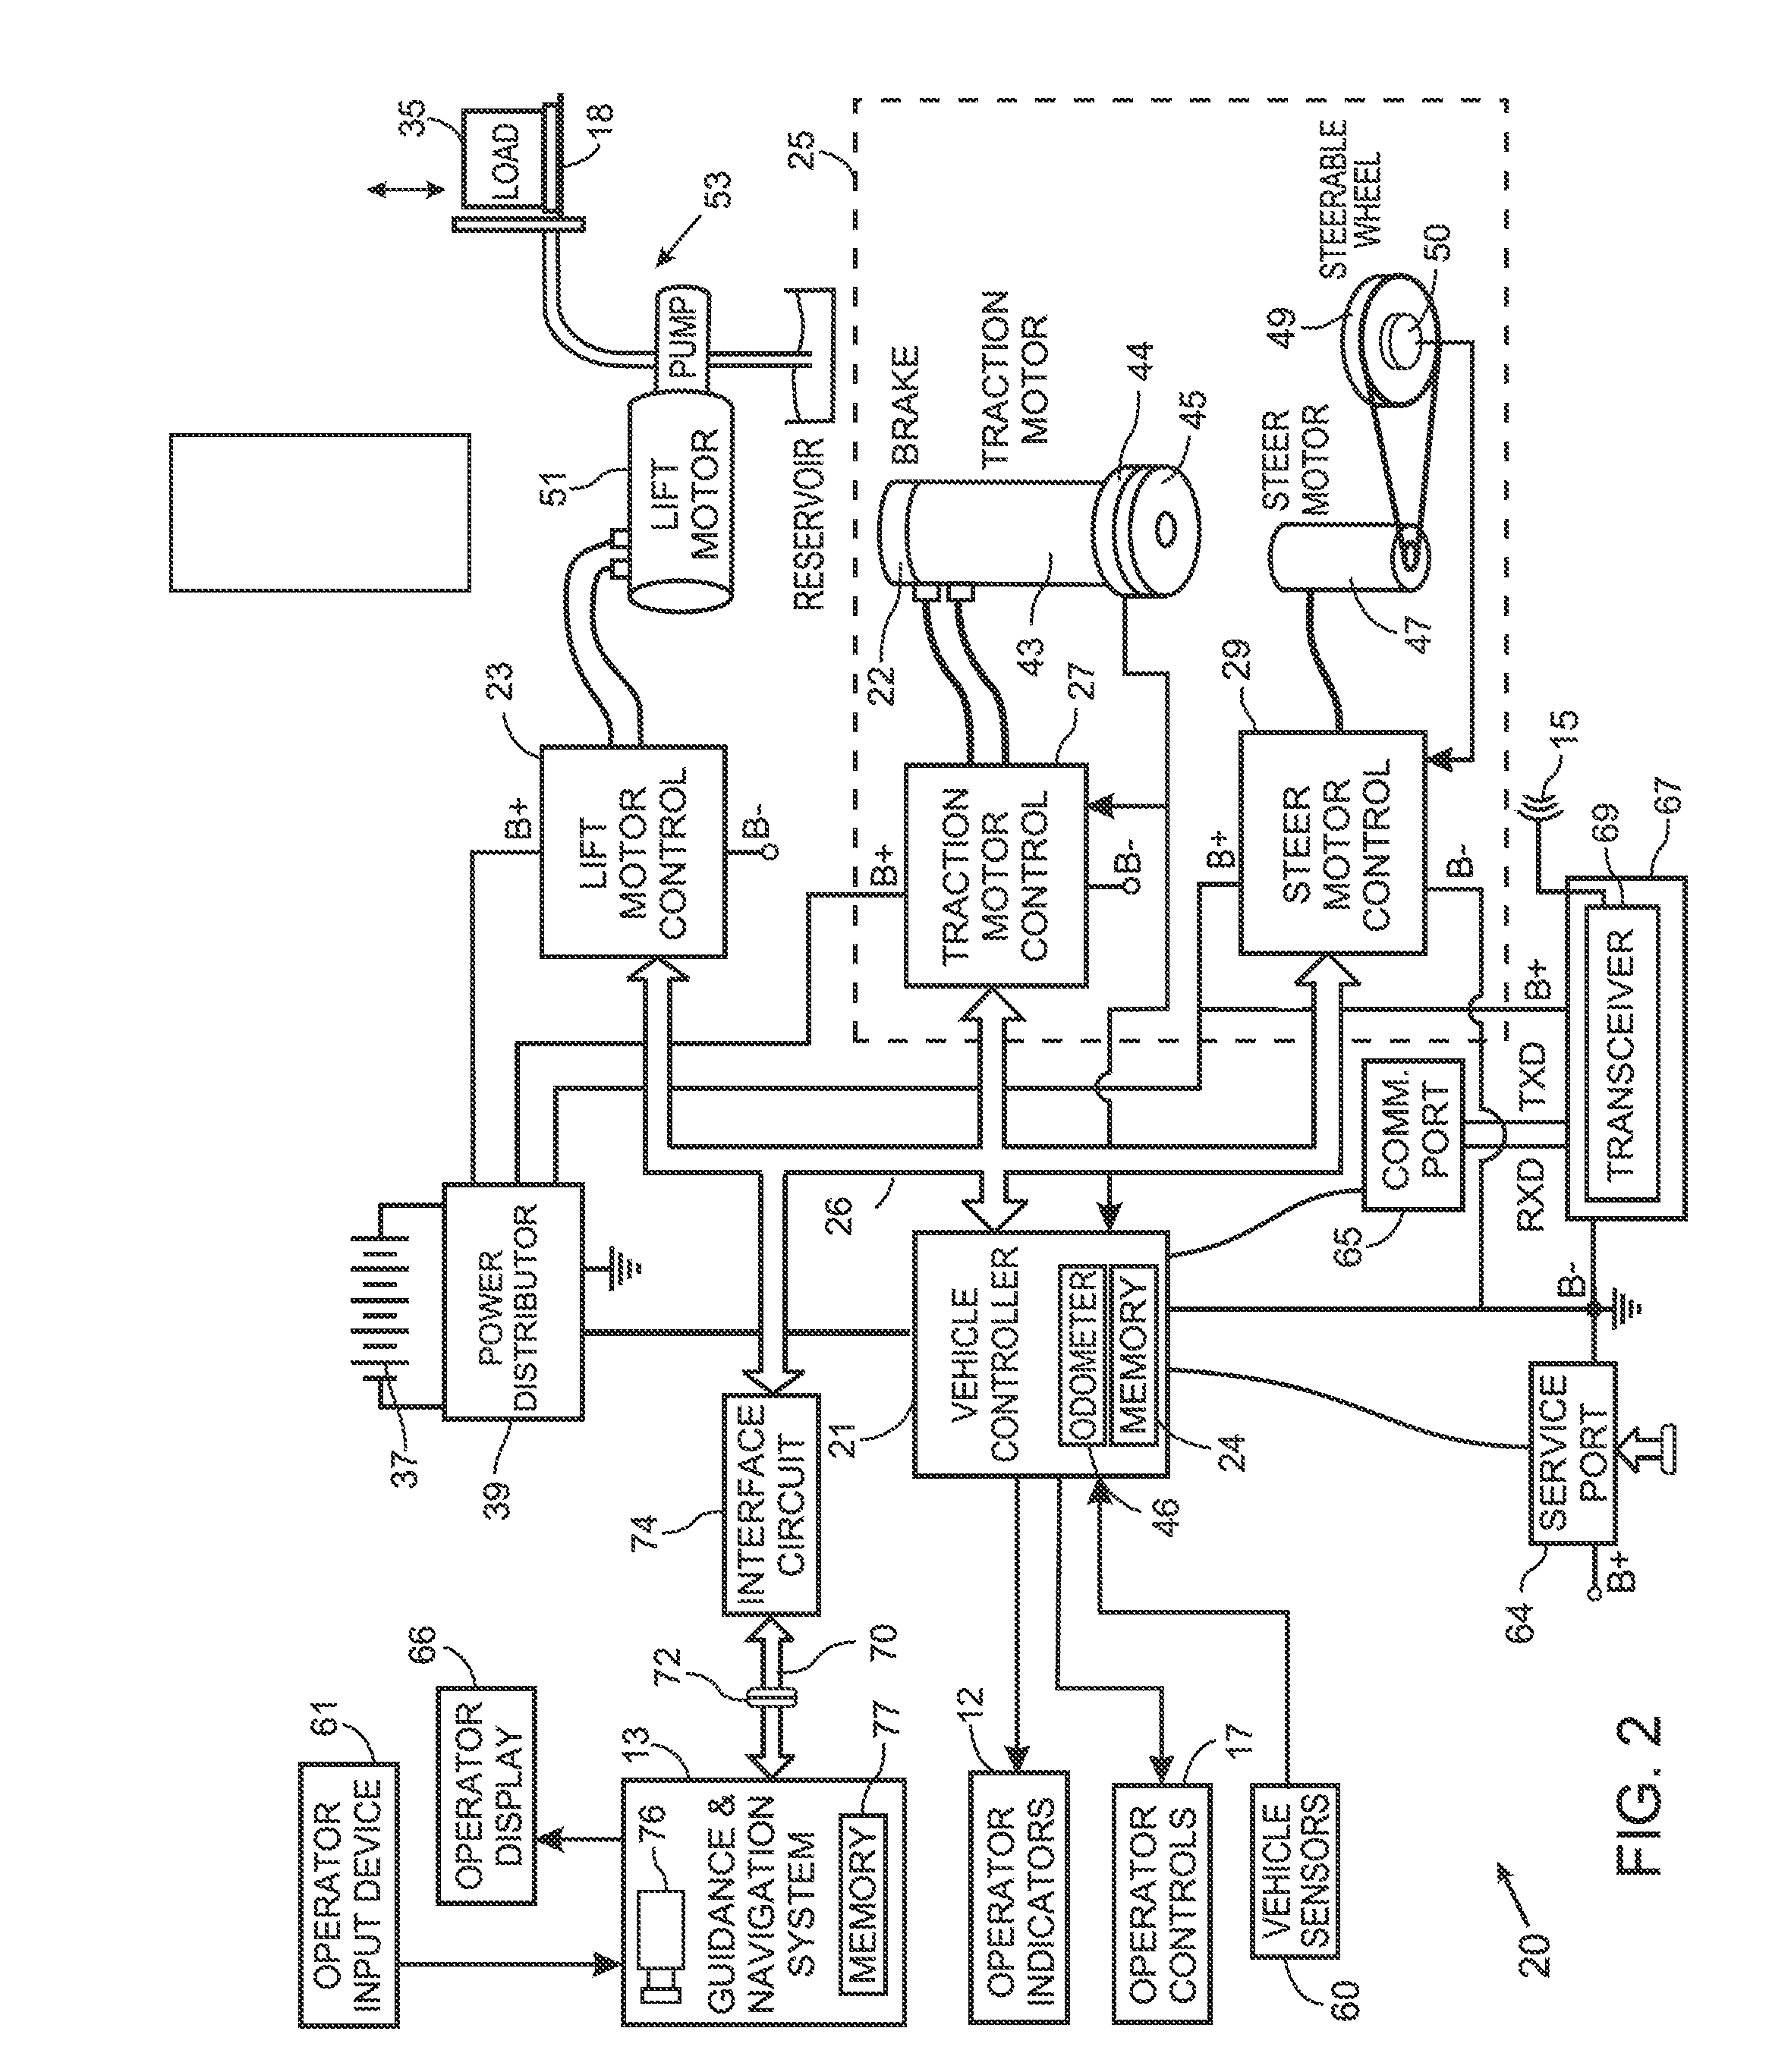 System and Method for Gathering Video Data Related to Operation of an Autonomous Industrial Vehicle